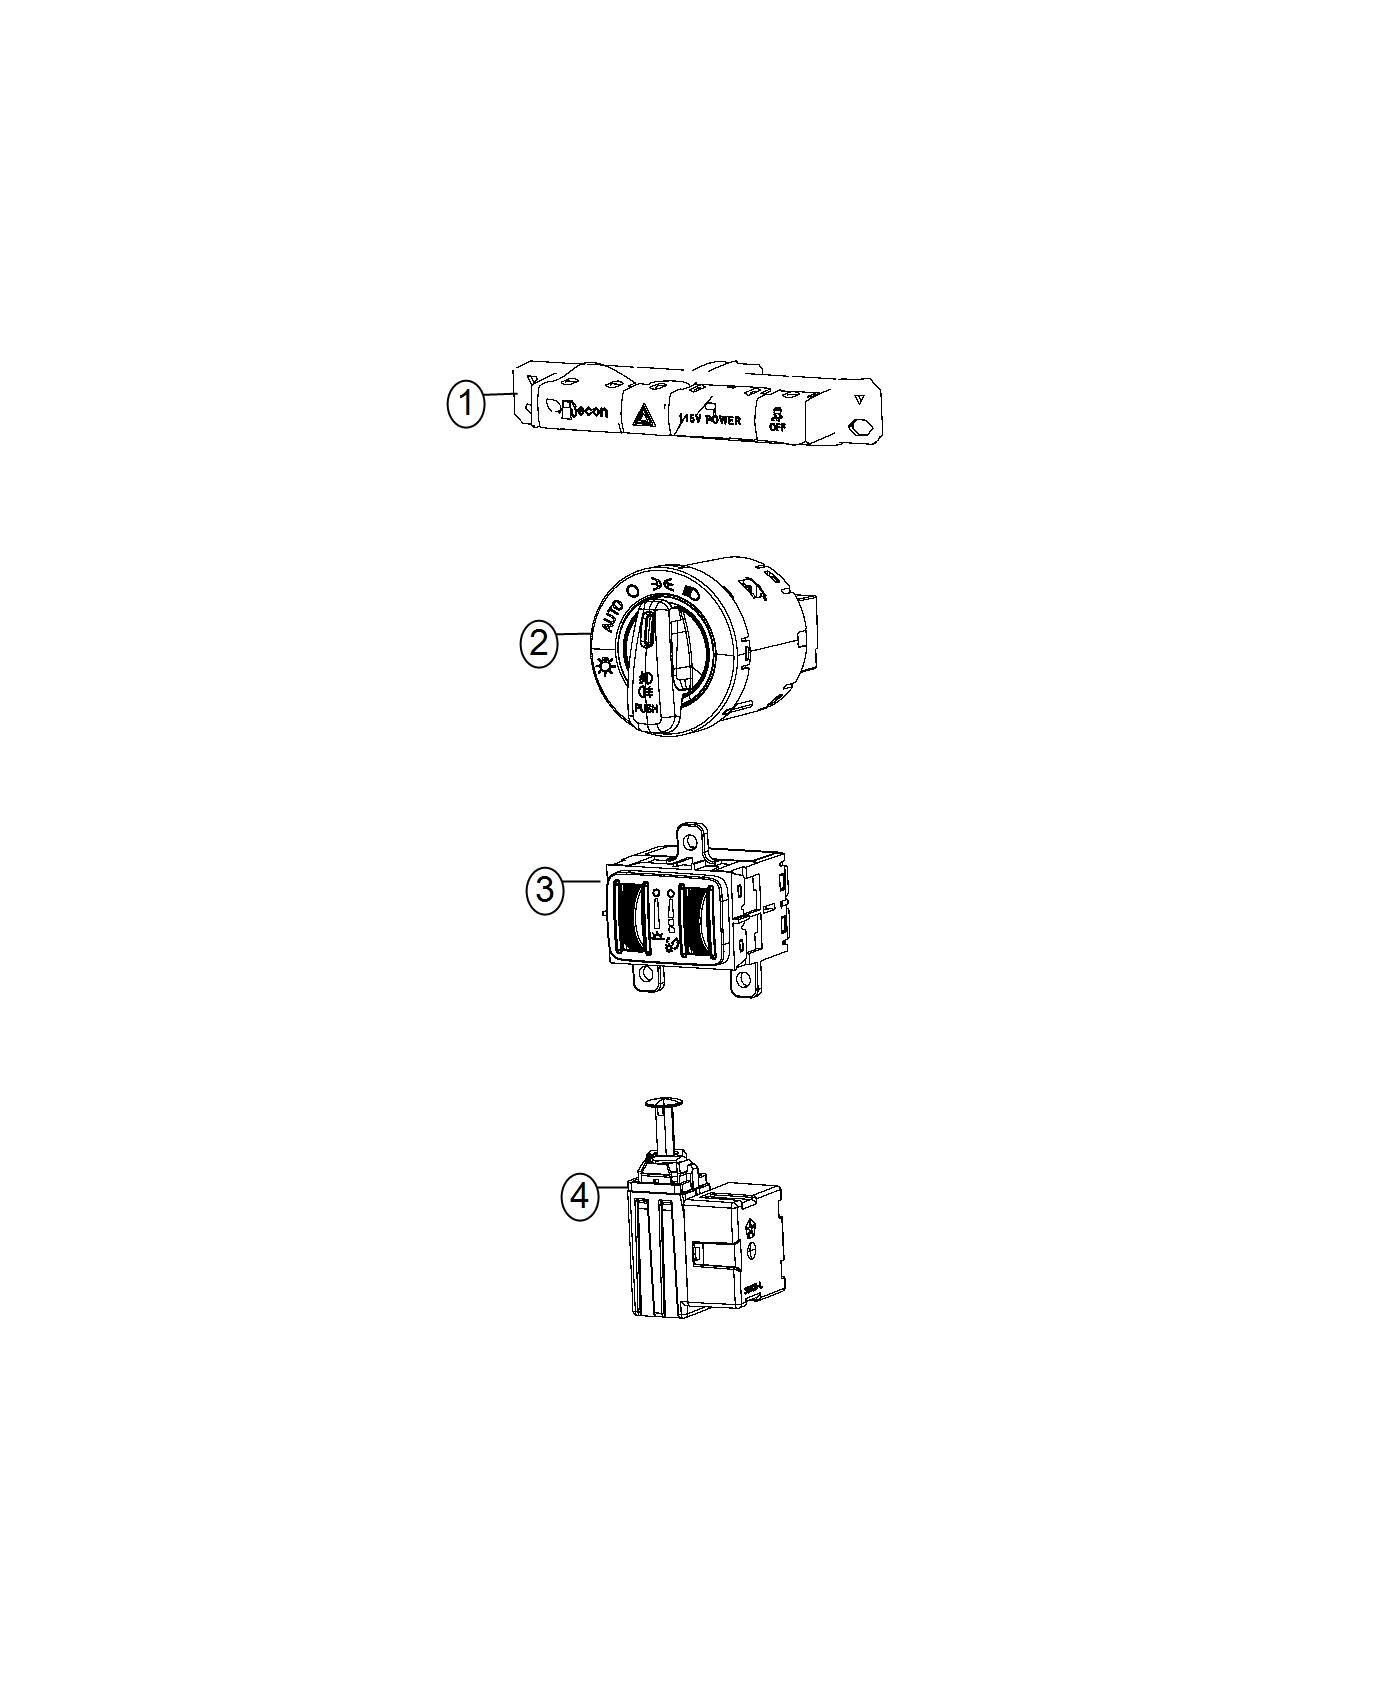 Module, Dashboard Switches and Headlamp / Dimmer. Diagram